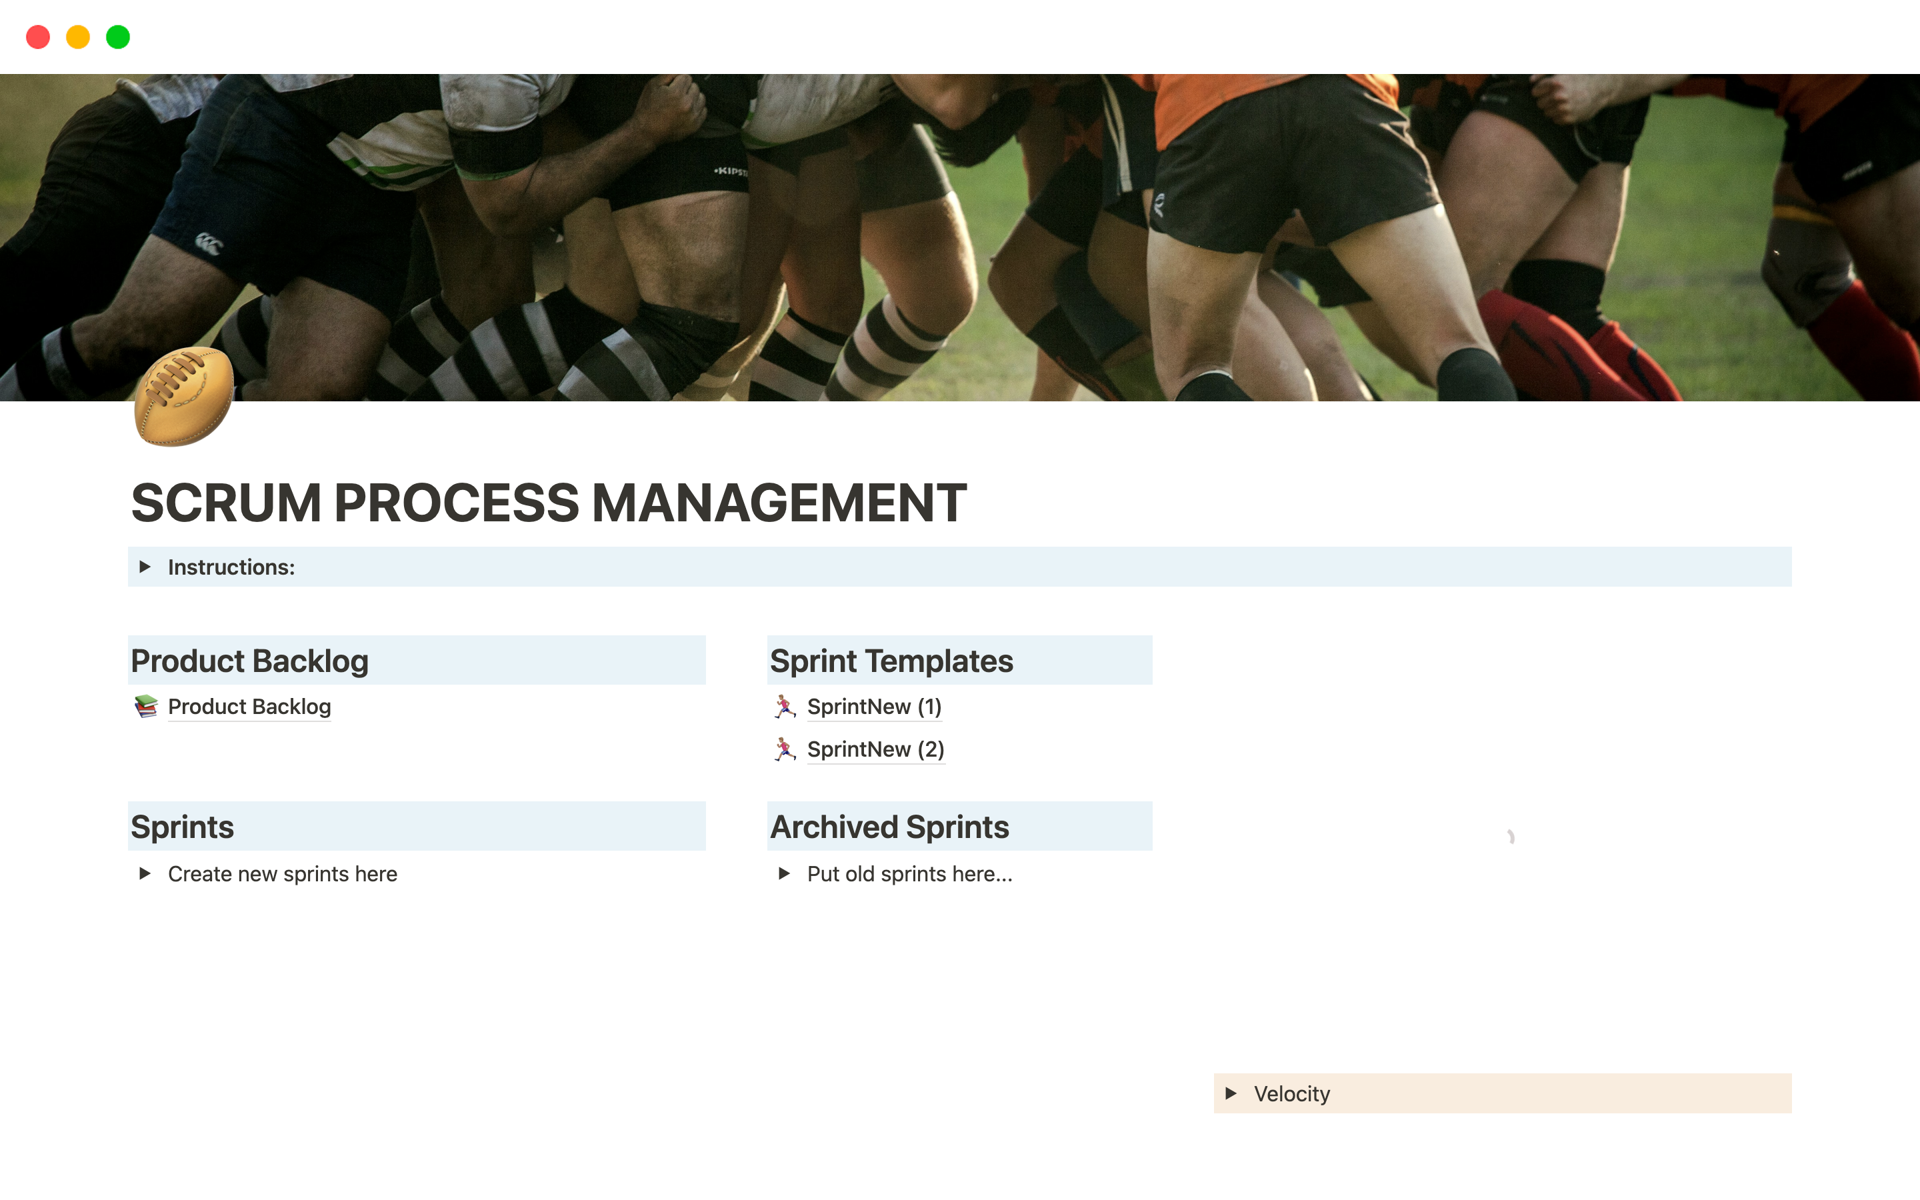 Everything you need to manage a project using Scrum Process: product/sprint backlogs, scrum board, sprint review/retro...